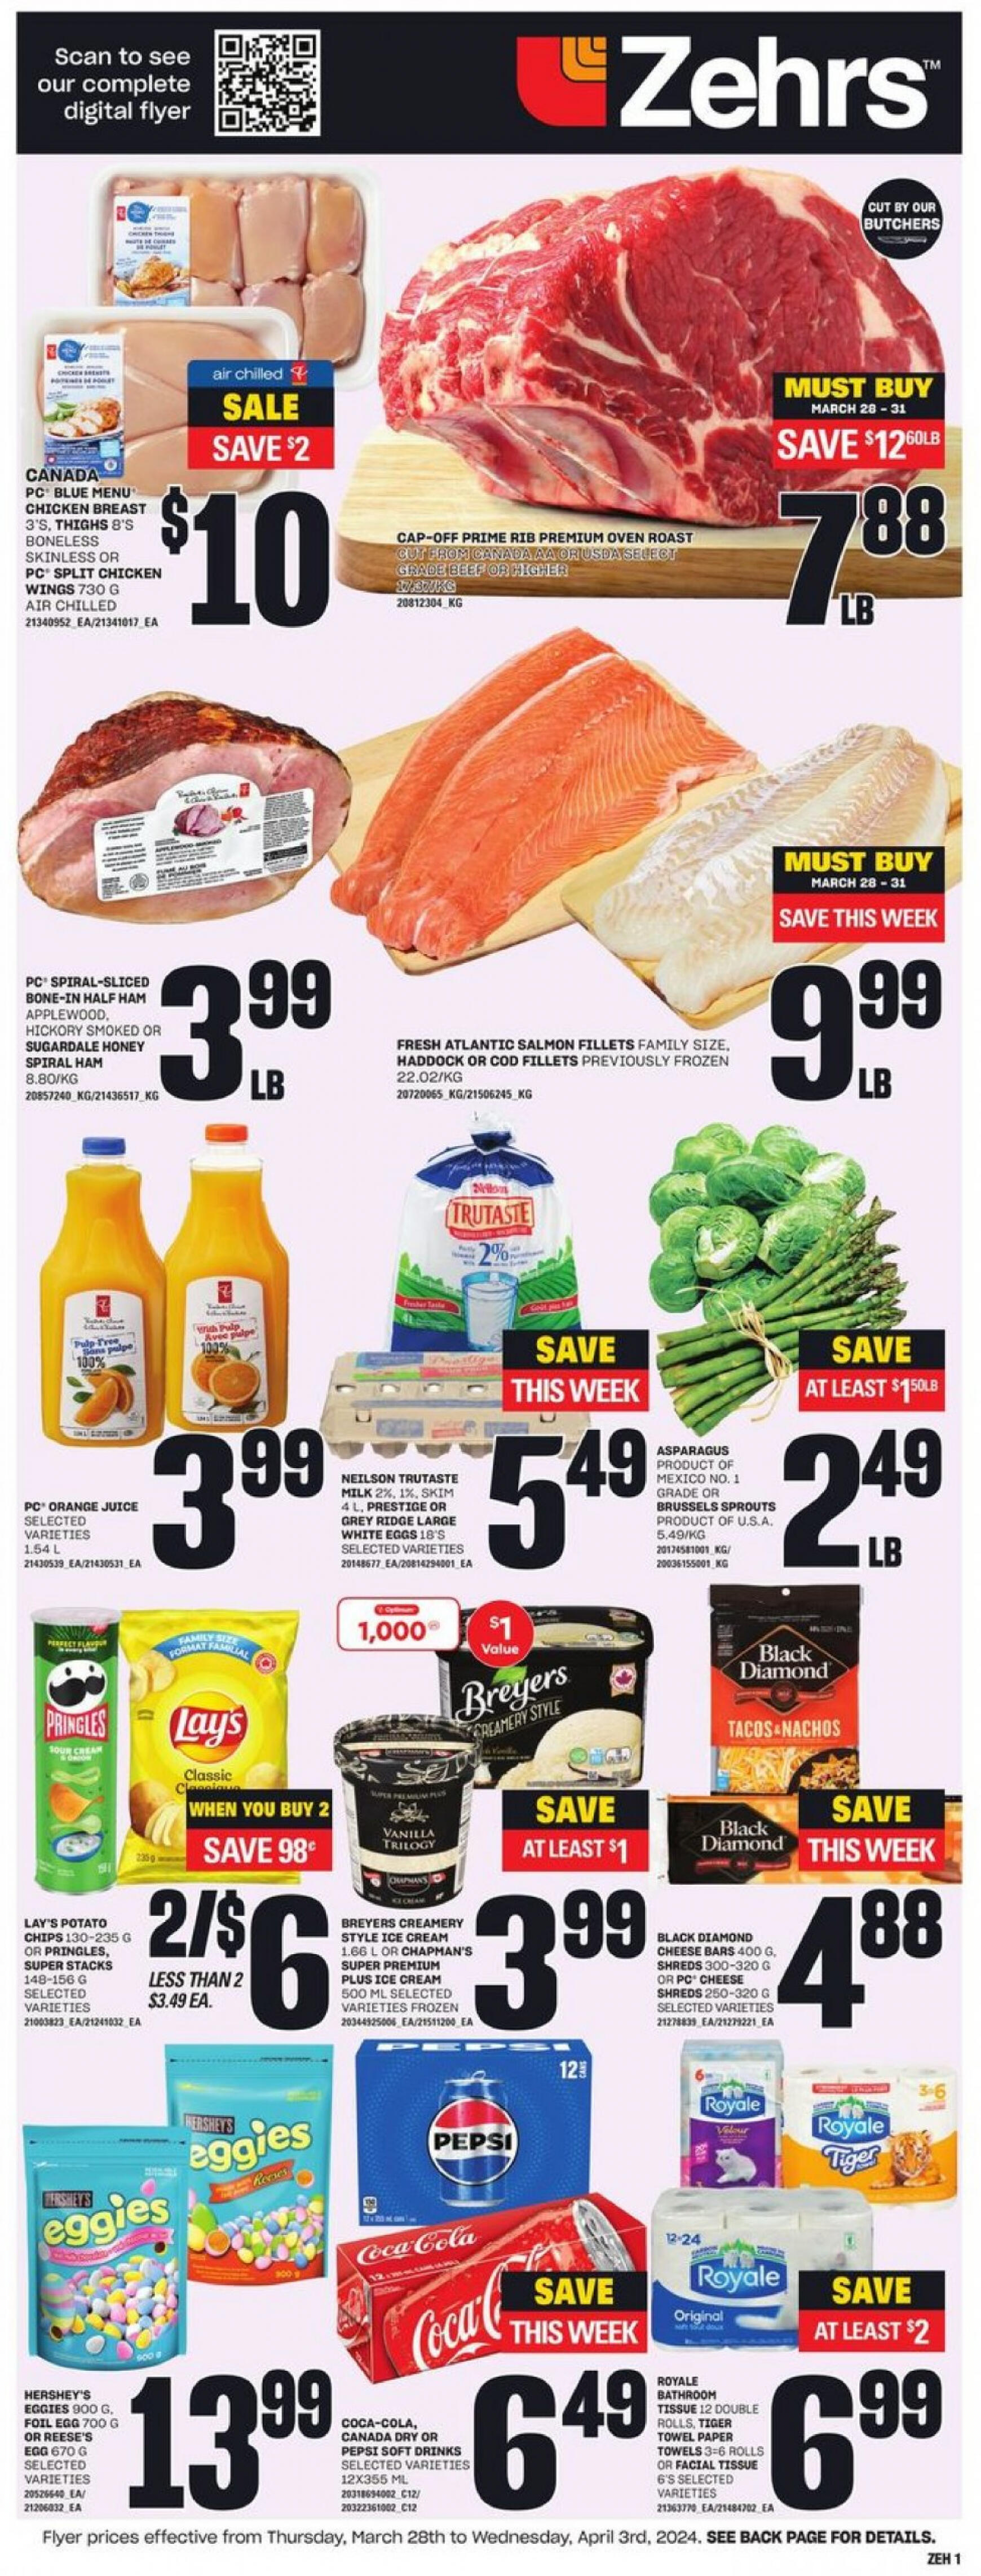 zehrs - Zehrs valid from 28.03.2024 - page: 5